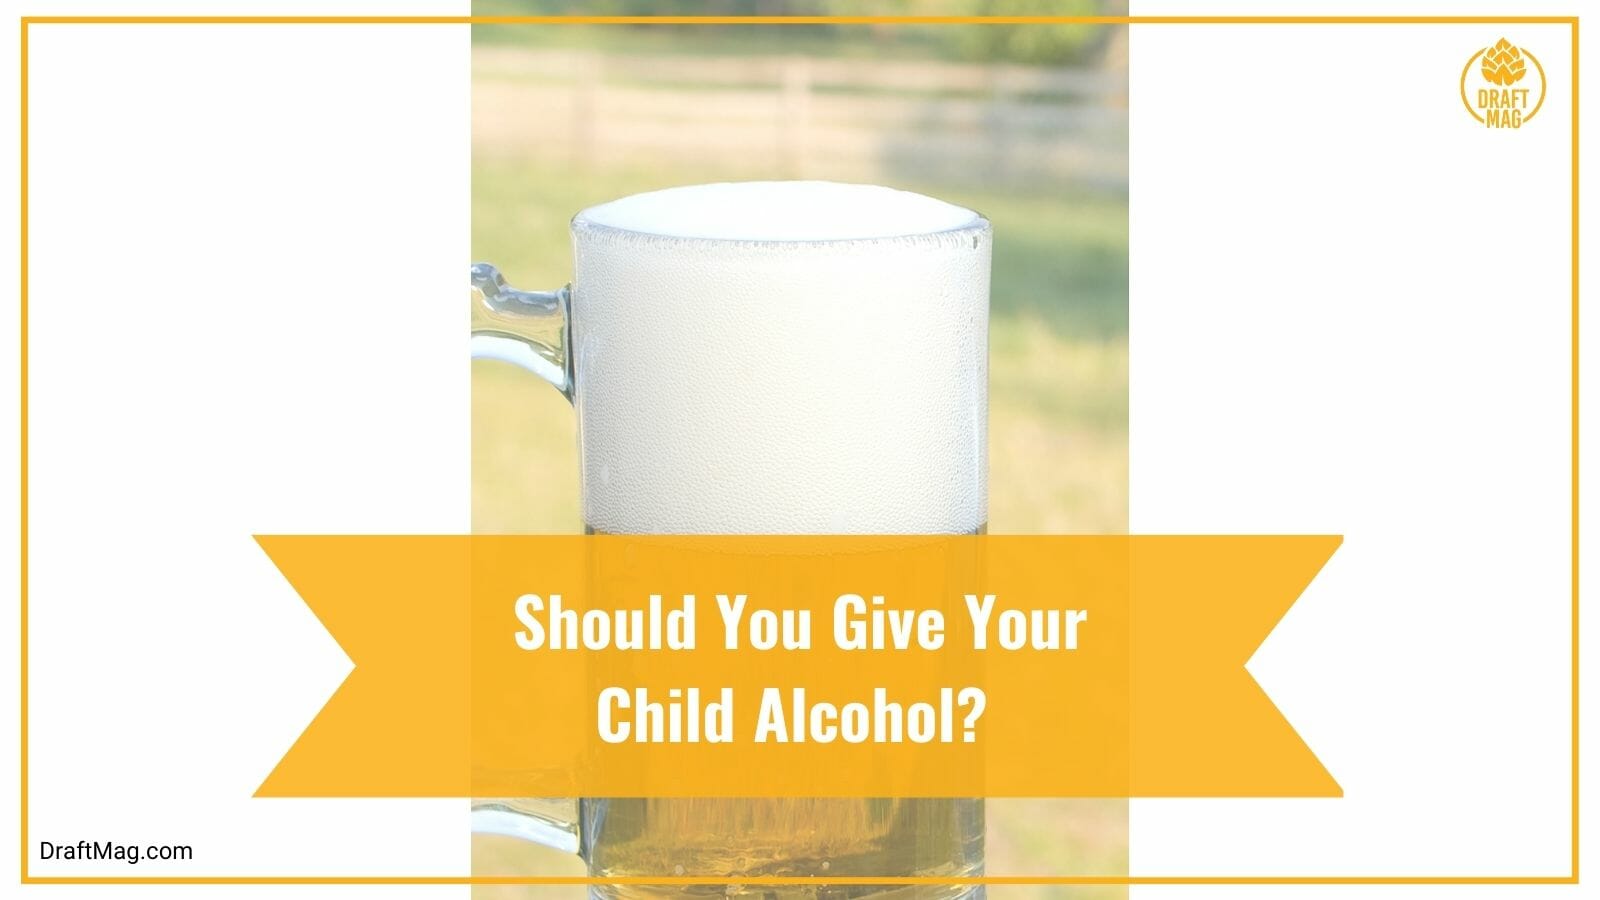 Should You Give Your Child Alcohol